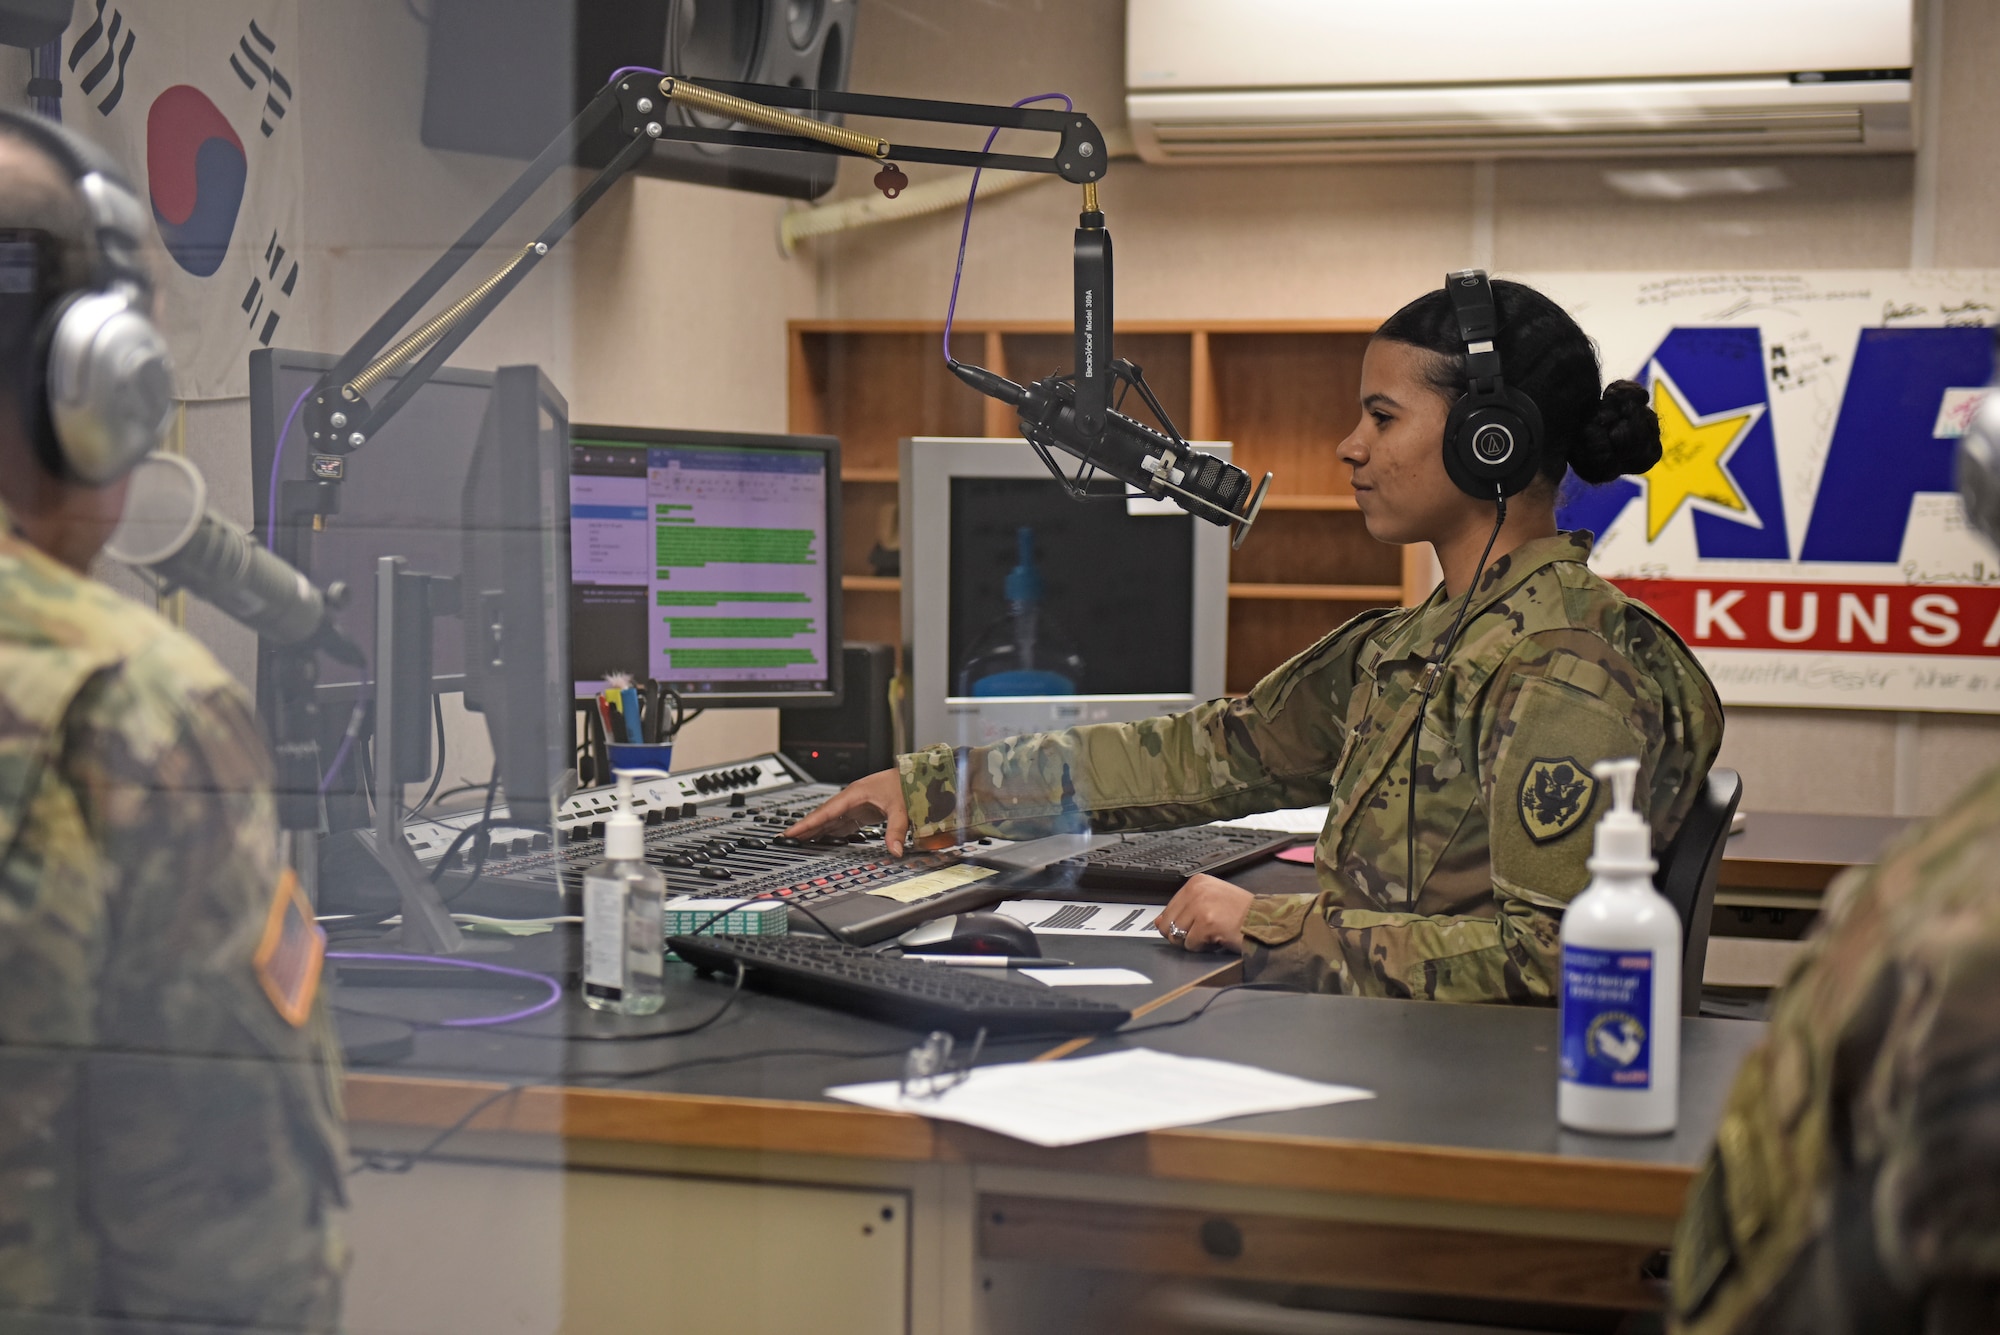 U.S. Air Force Staff Sgt. AJ Duprey, American Forces Network video NCO in charge, conducts a radio show at Kunsan Air Base, Republic of Korea, April 28, 2020. AFN Kunsan is a joint organization, helping commanders maintain readiness and morale through the dissemination of fun, engaging and informative content on the radio, social media and television. (U.S. Air Force photo by Staff Sgt. Mackenzie Mendez)